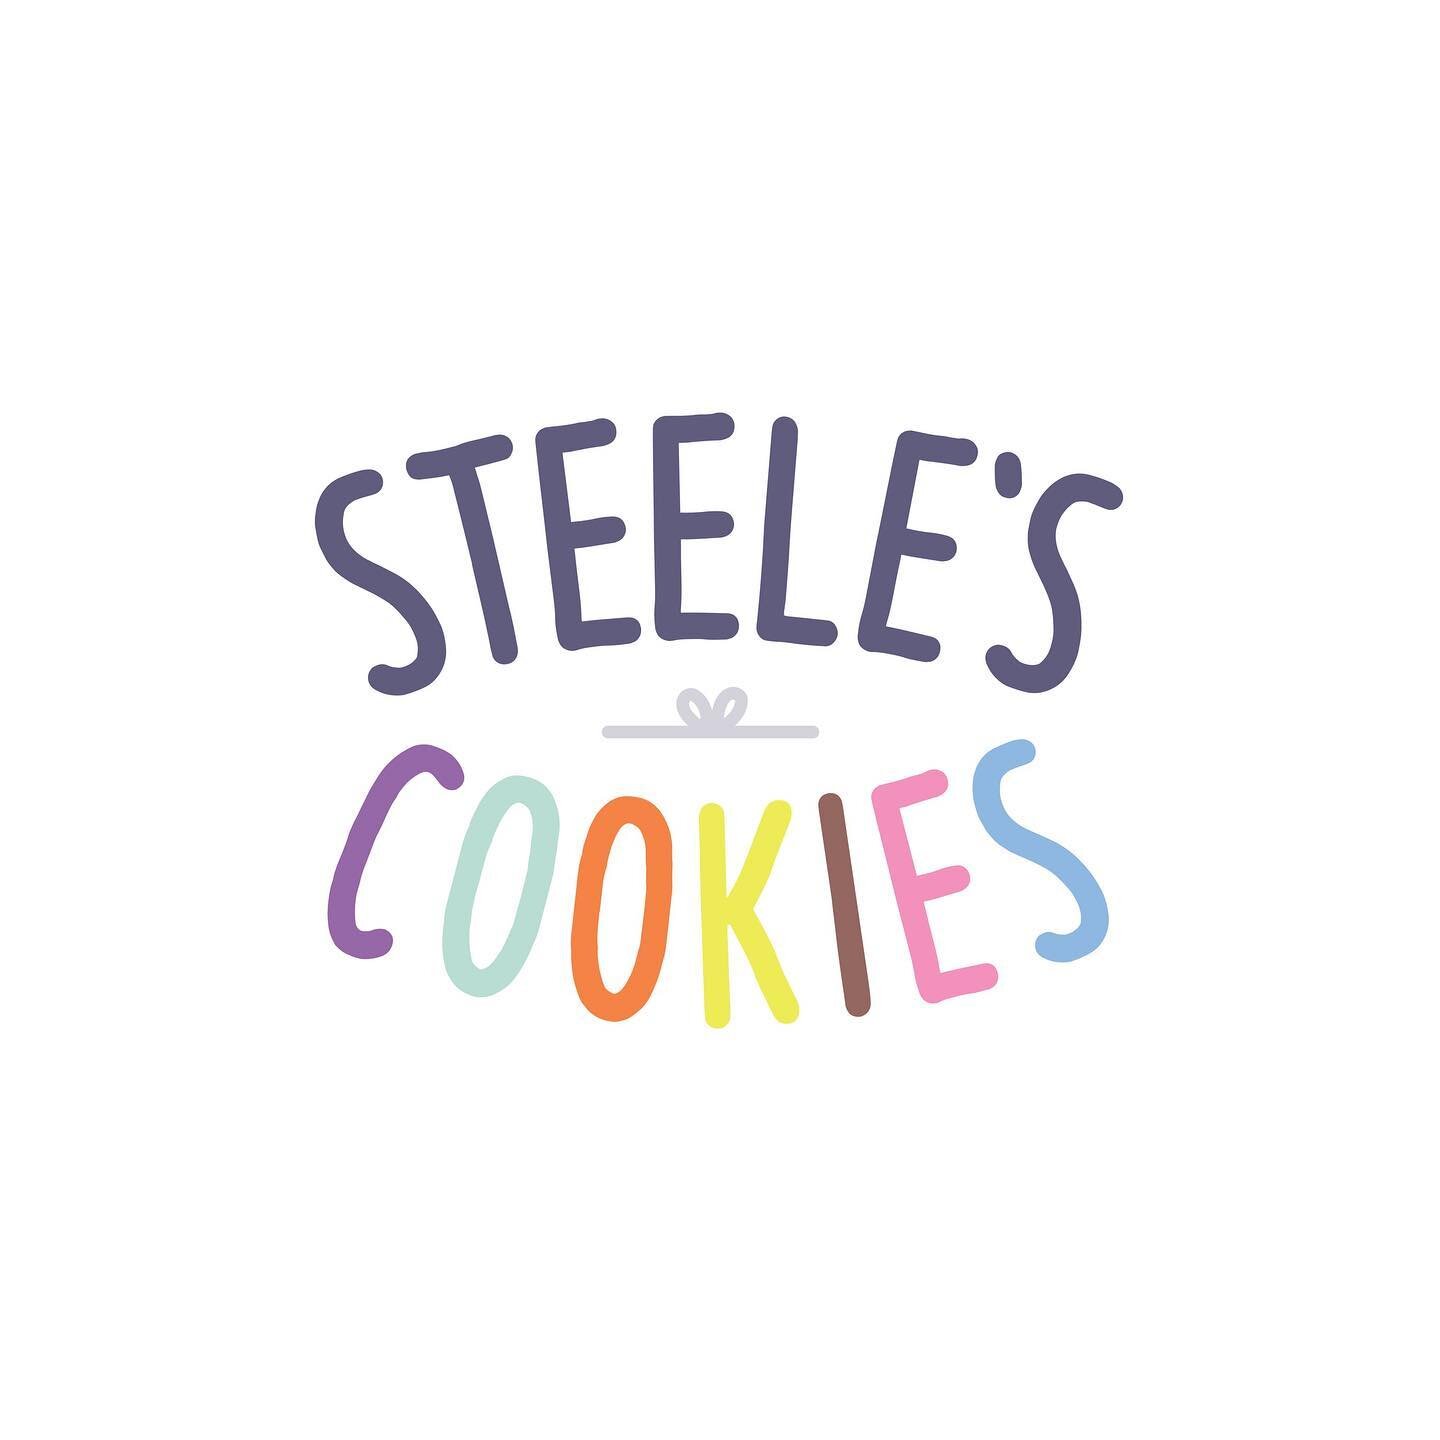 Official logo of Steele&rsquo;s Cookies provided by the incredibly talented @oddburton 
#officiallyofficial #cookiesofinstagram #cookier